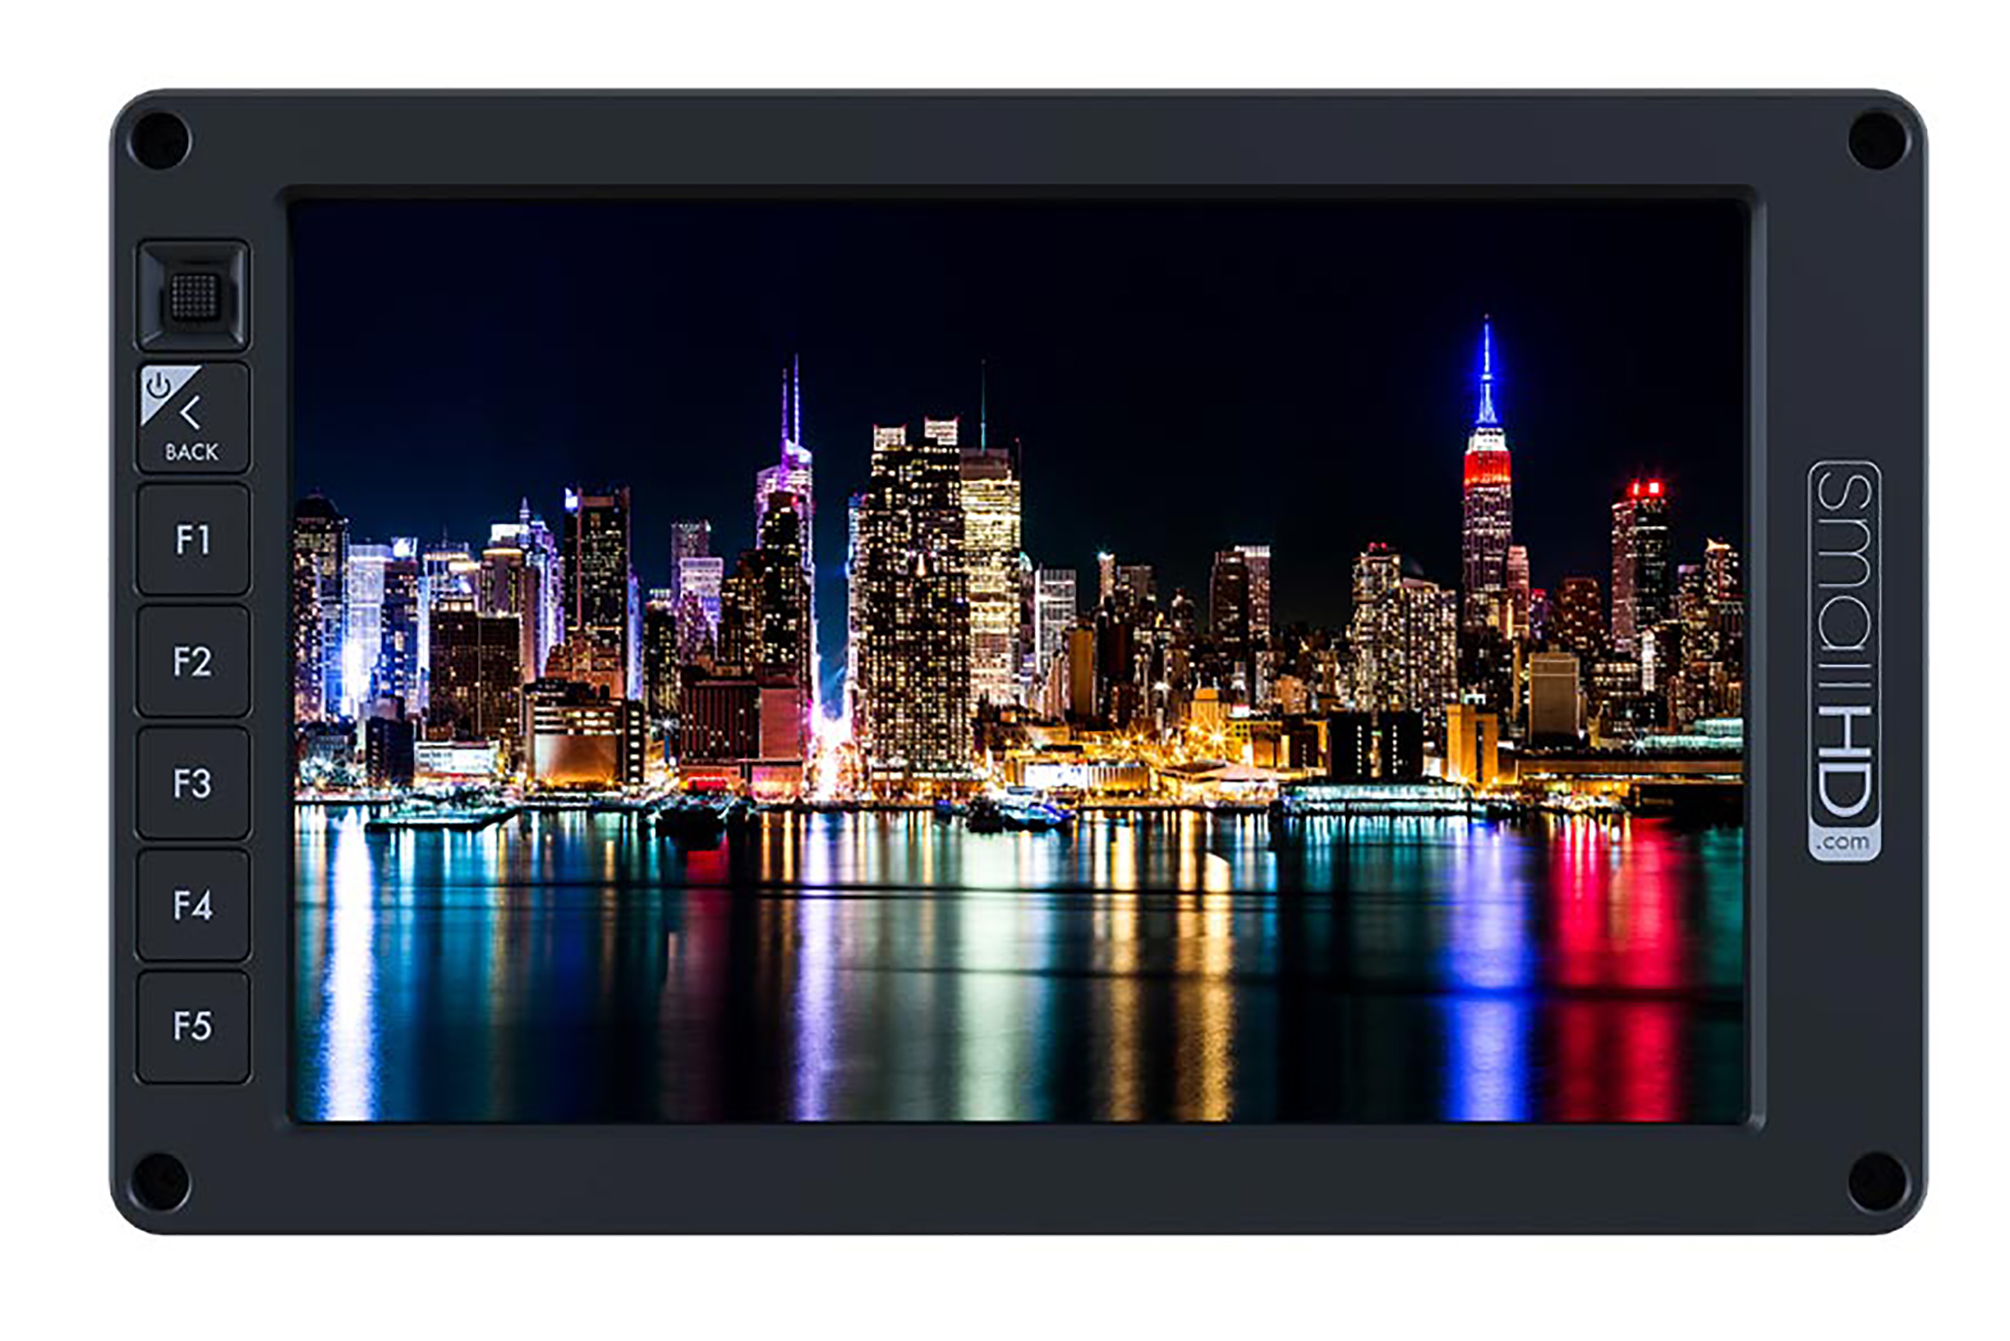 *Discontinued* SmallHD 702-OLED 7.7" 1280x800 OLED Monitor with Wide Color Gamut, HD-SDI/HDMI and 30